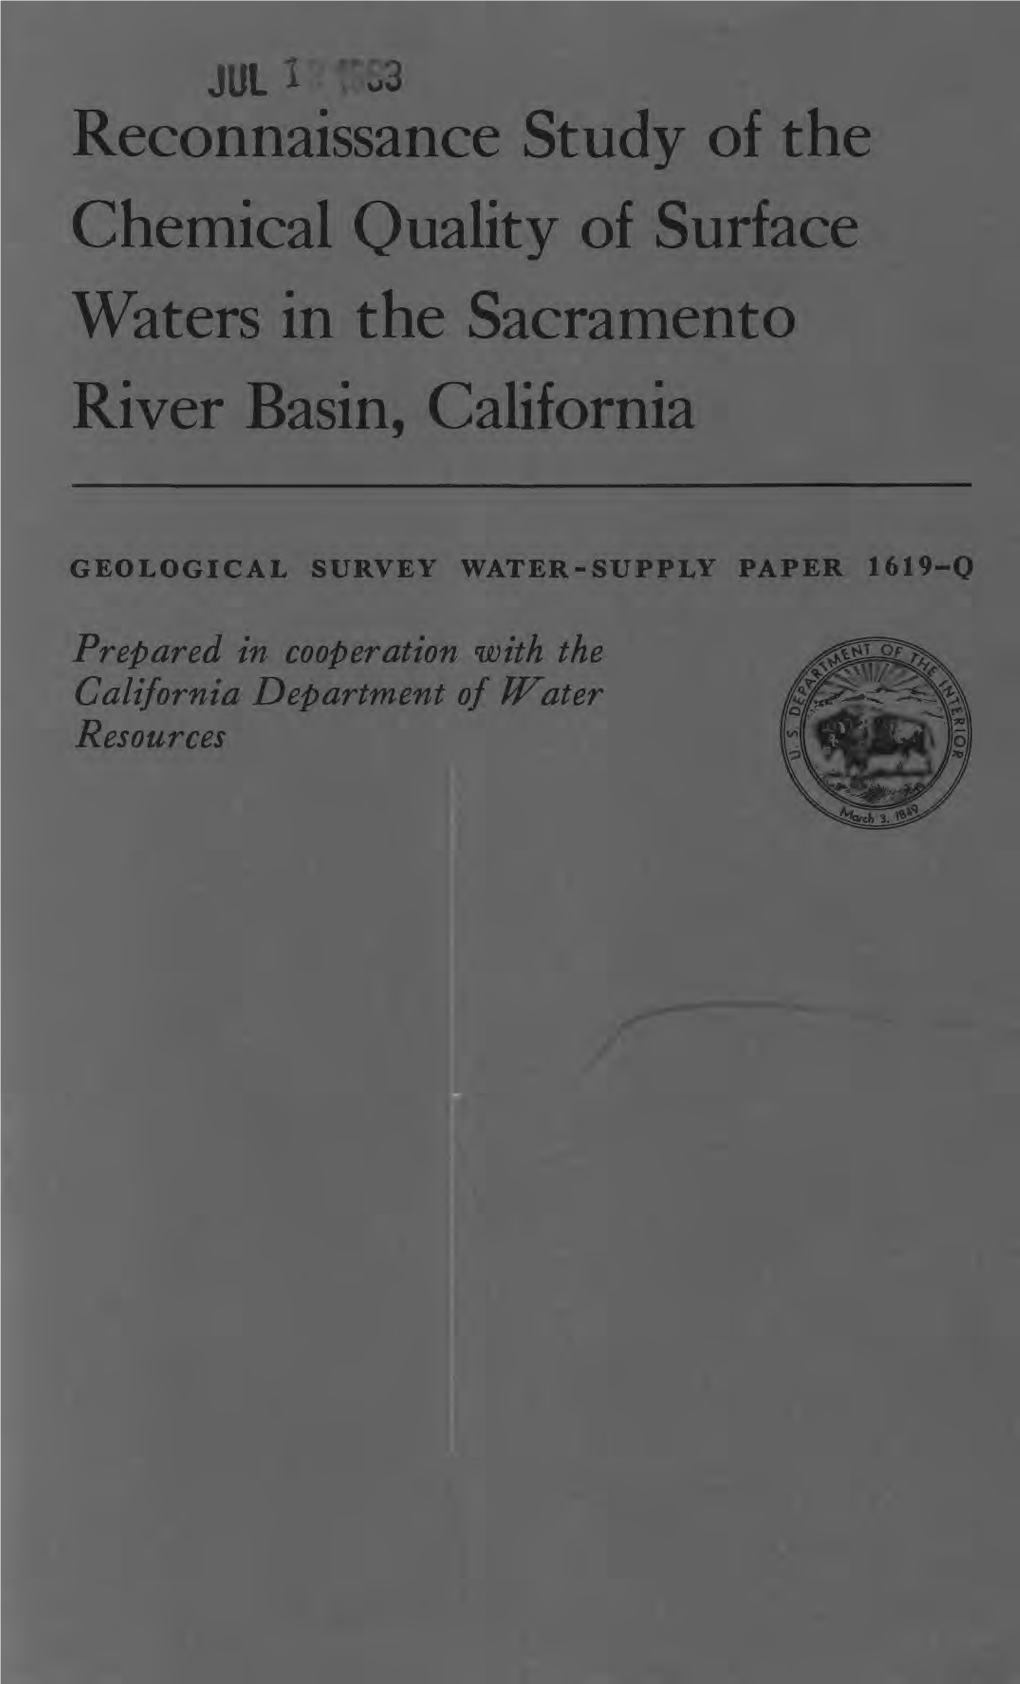 Reconnaissance Study of the Chemical Quality of Surface Waters in the Sacramento River Basin, California